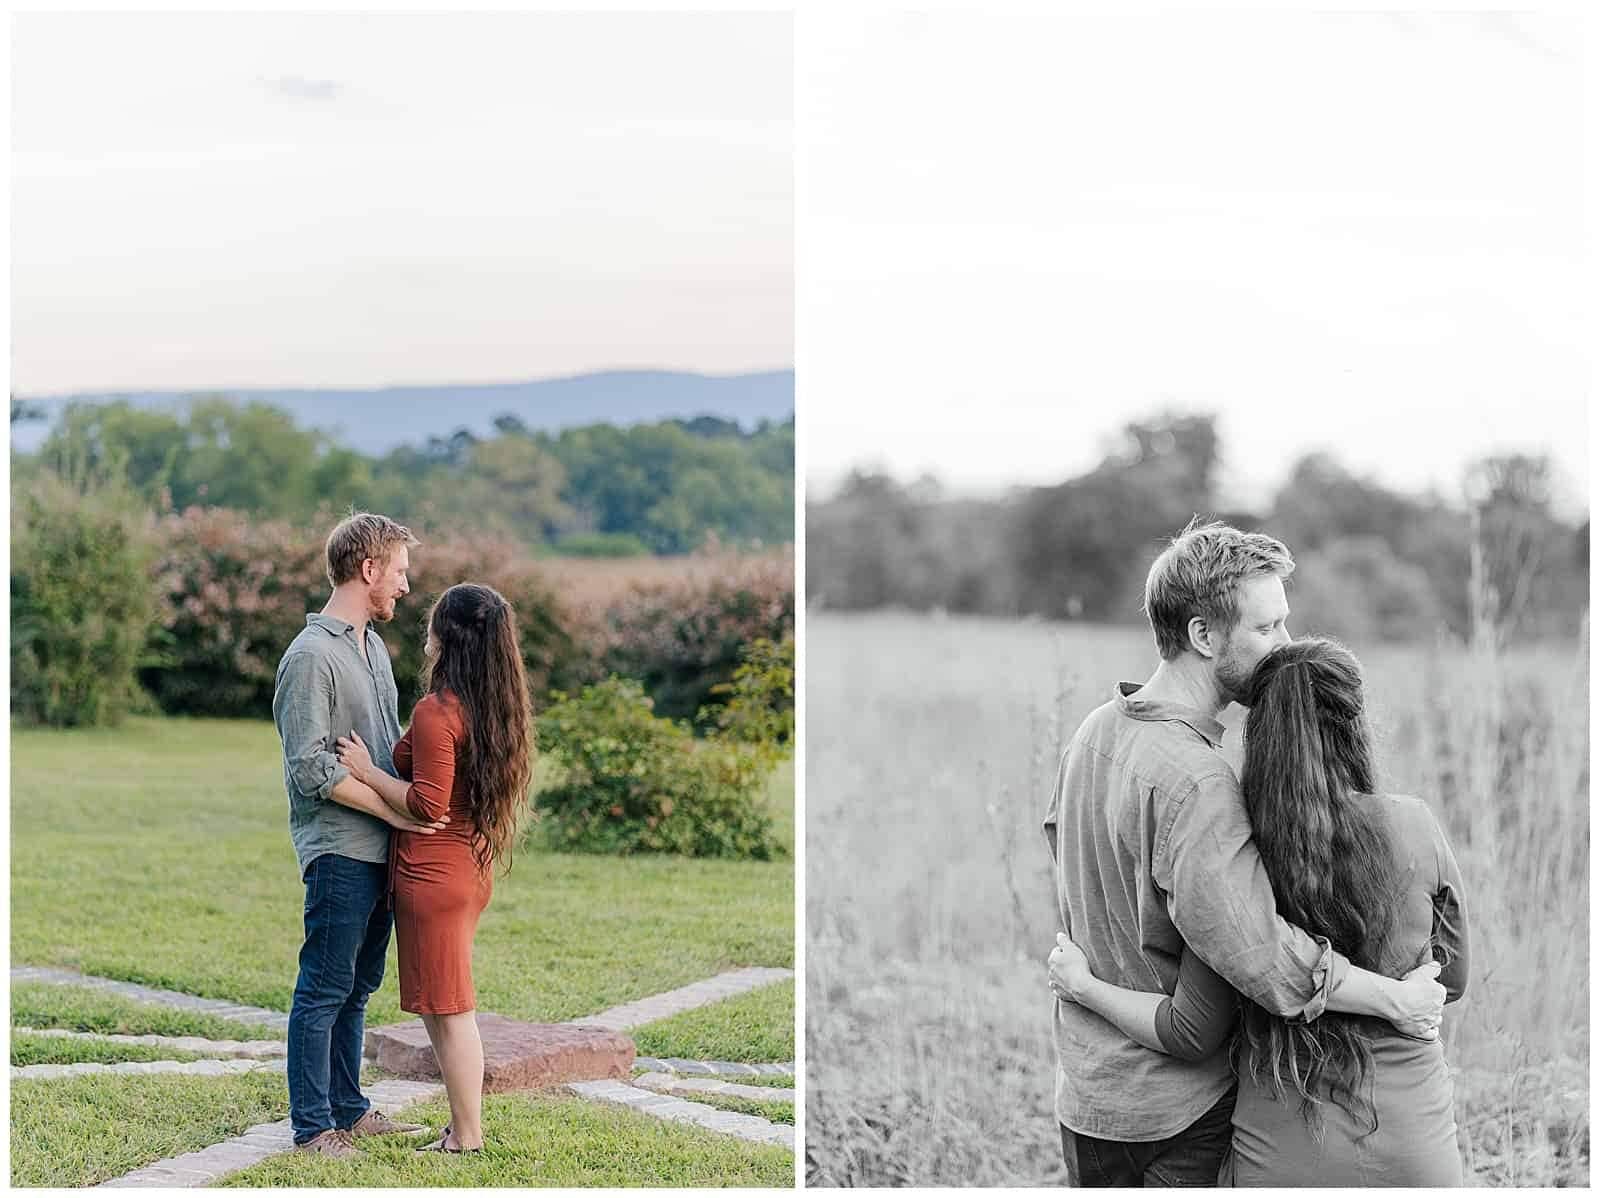 Couple shares a moment alone in a open field during engagement photos at blandy experimental farm